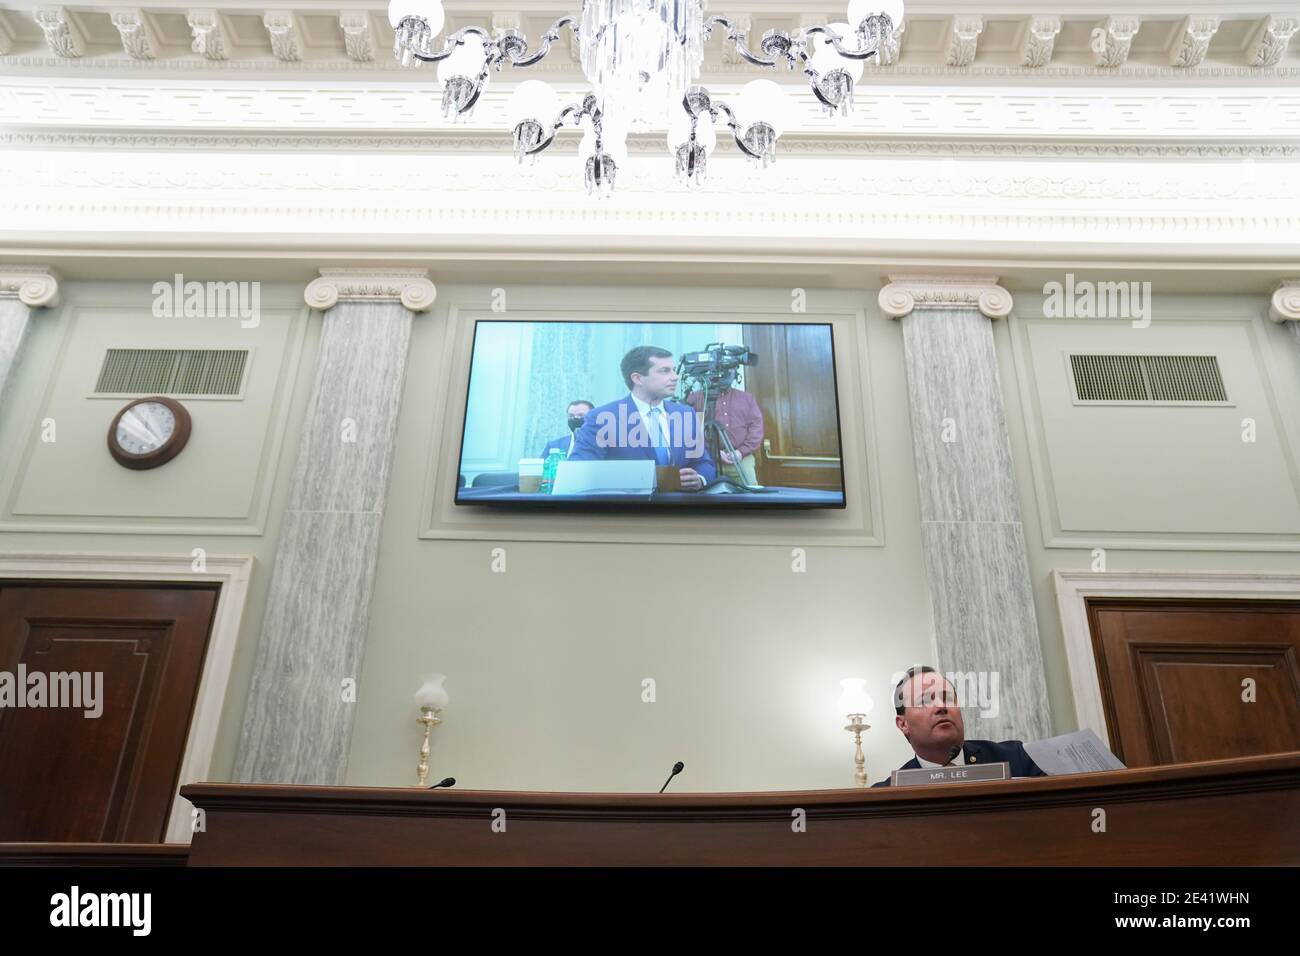 United States Senator Mike Lee (Republican of Utah), bottom right, speaks as Pete Buttigieg, U.S. secretary of transportation nominee for U.S. President Joe Biden, is displayed on a television monitor during a Senate Commerce, Science and Transportation Committee confirmation hearing in Washington, D.C., U.S., on Thursday, Jan. 21, 2021. Buttigieg, is pledging to carry out the administration's ambitious agenda to rebuild the nation's infrastructure, calling it a 'generational opportunity' to create new jobs, fight economic inequality and stem climate change. Credit: Stefani Reynolds / Pool via Stock Photo